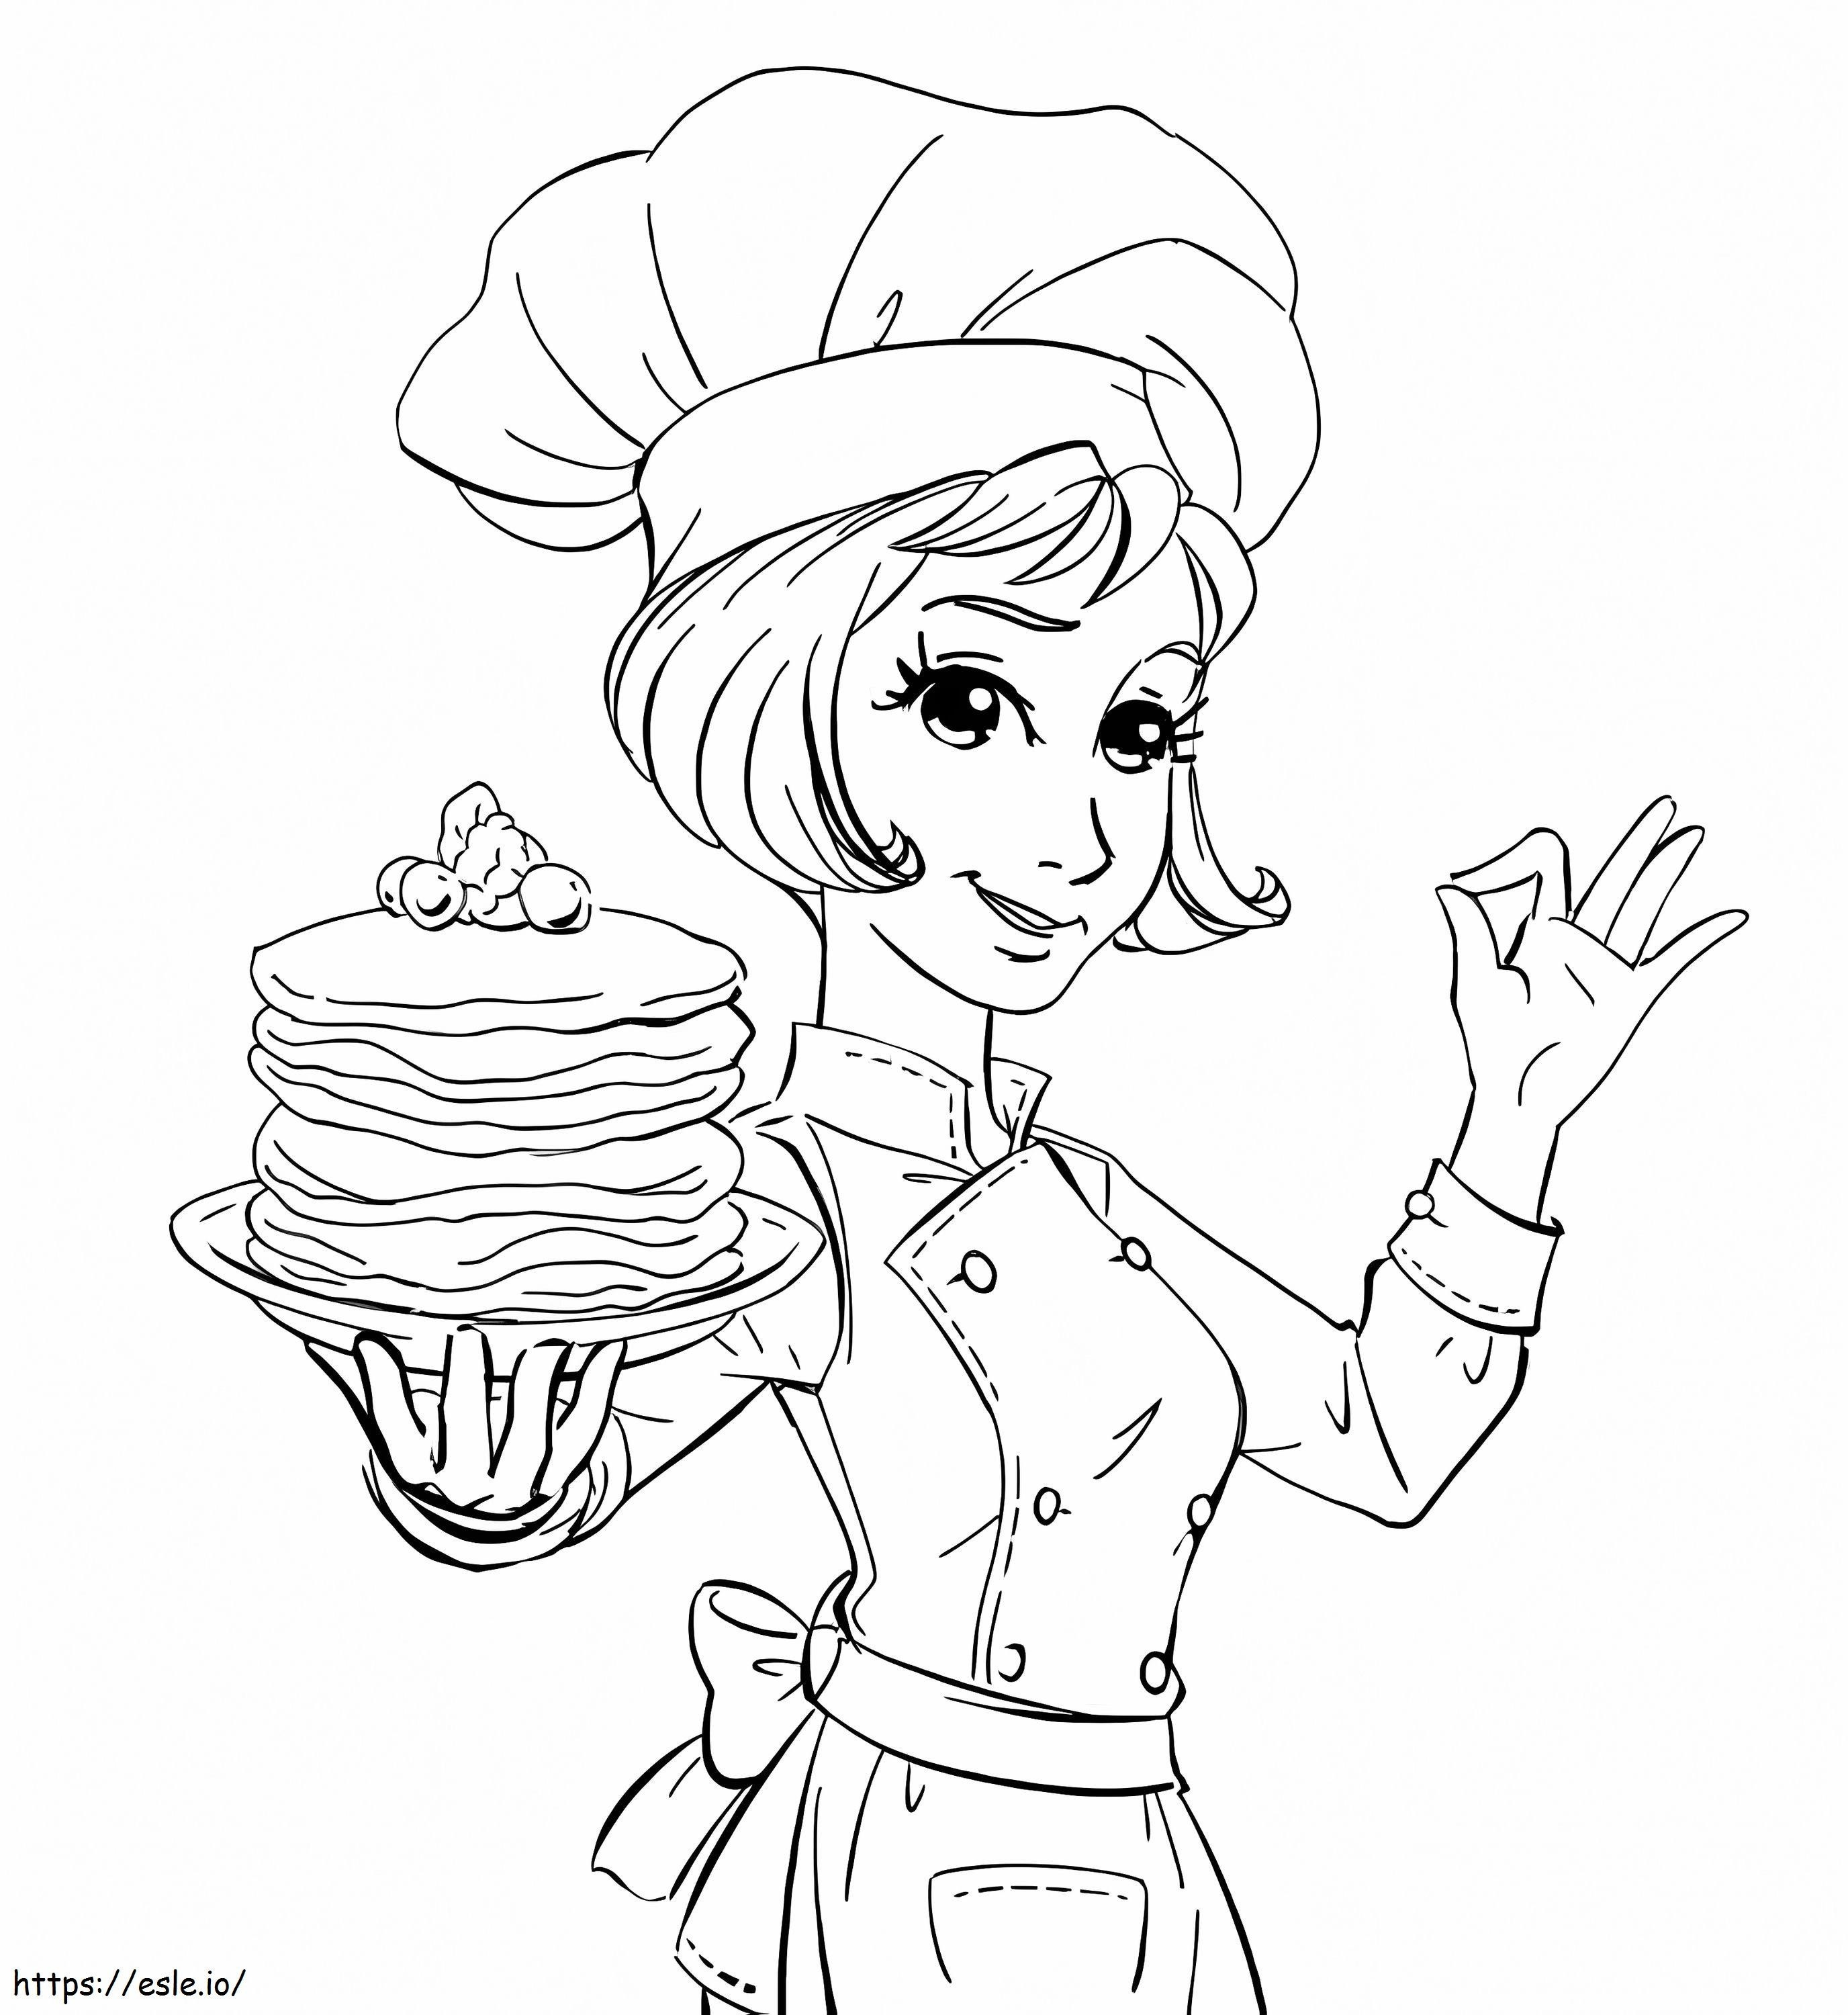 Cocirena Girl Cooking Pancakes coloring page